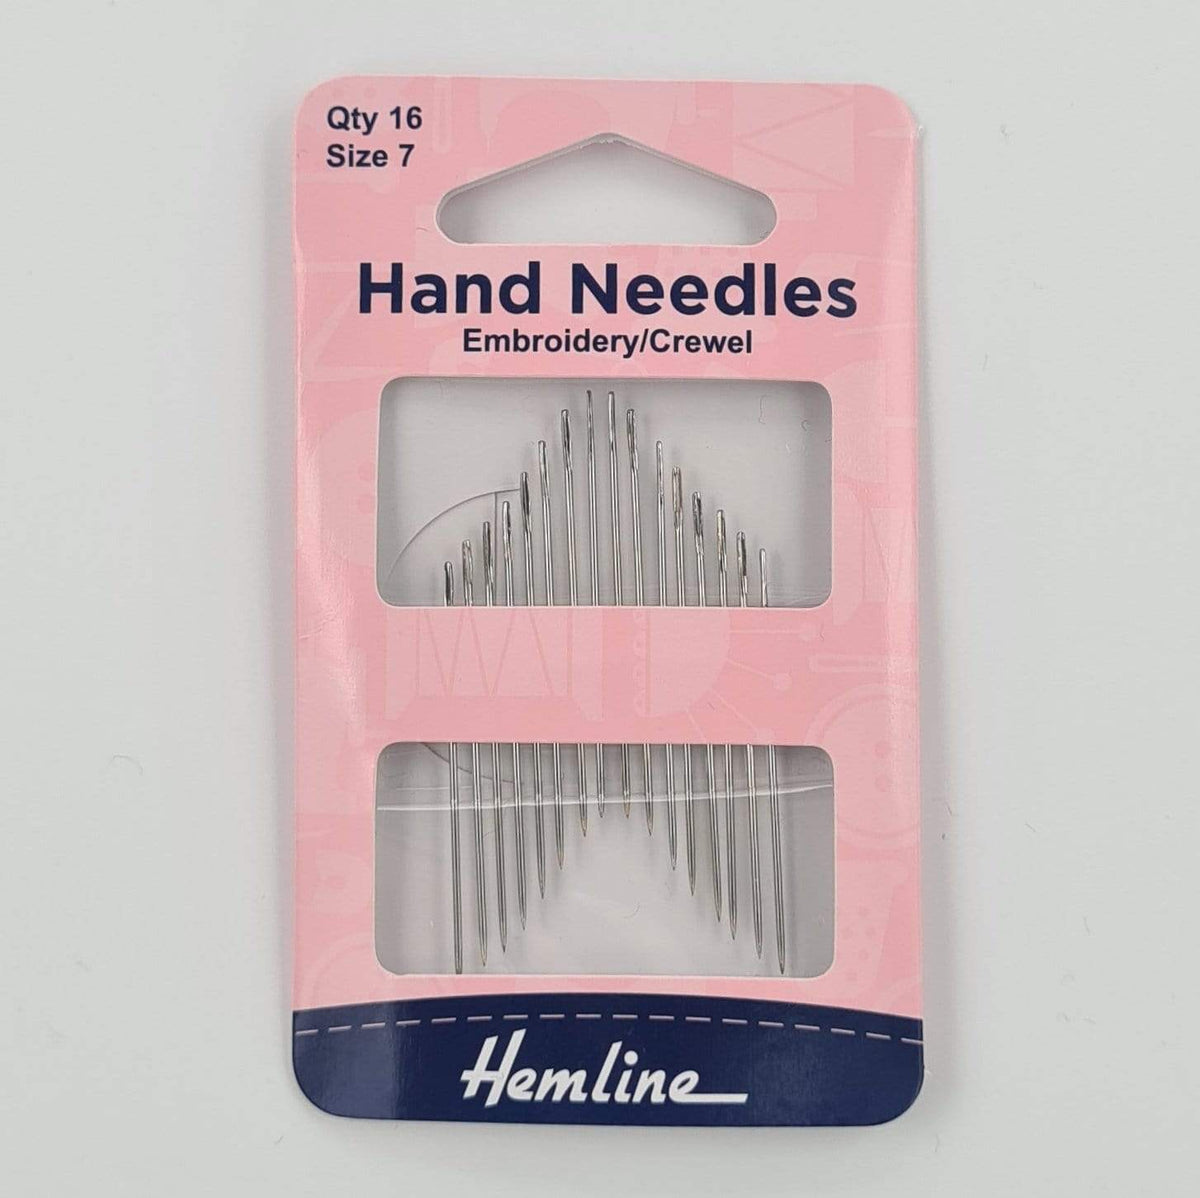 Paraffle Embroidery Supplies &amp; Accessories Hemline Embroidery Needles - size 7